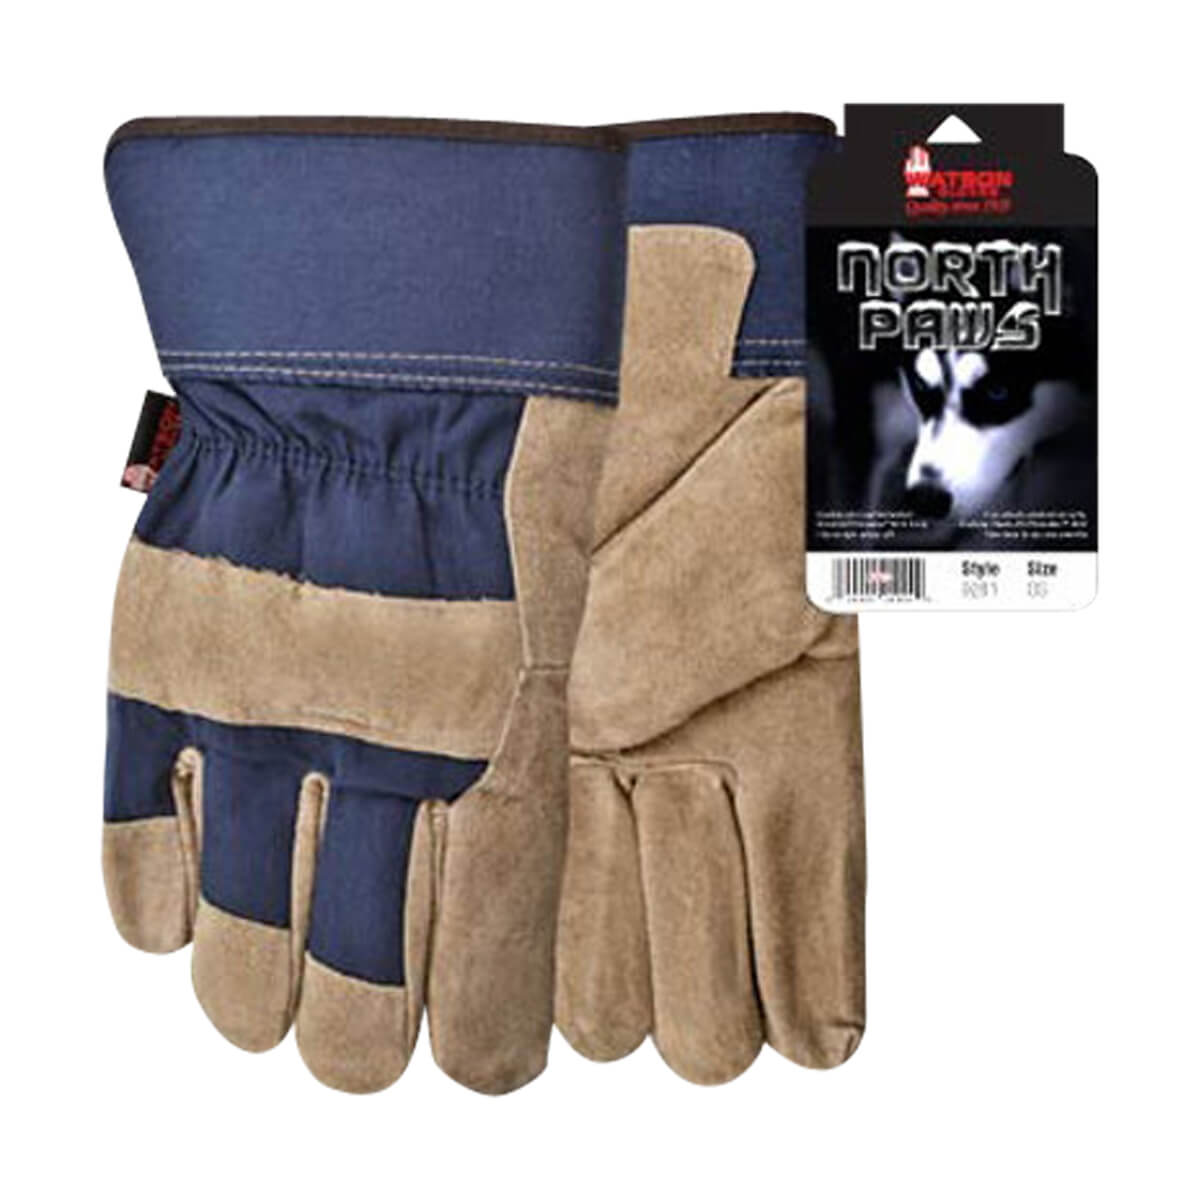 North Paws Gloves